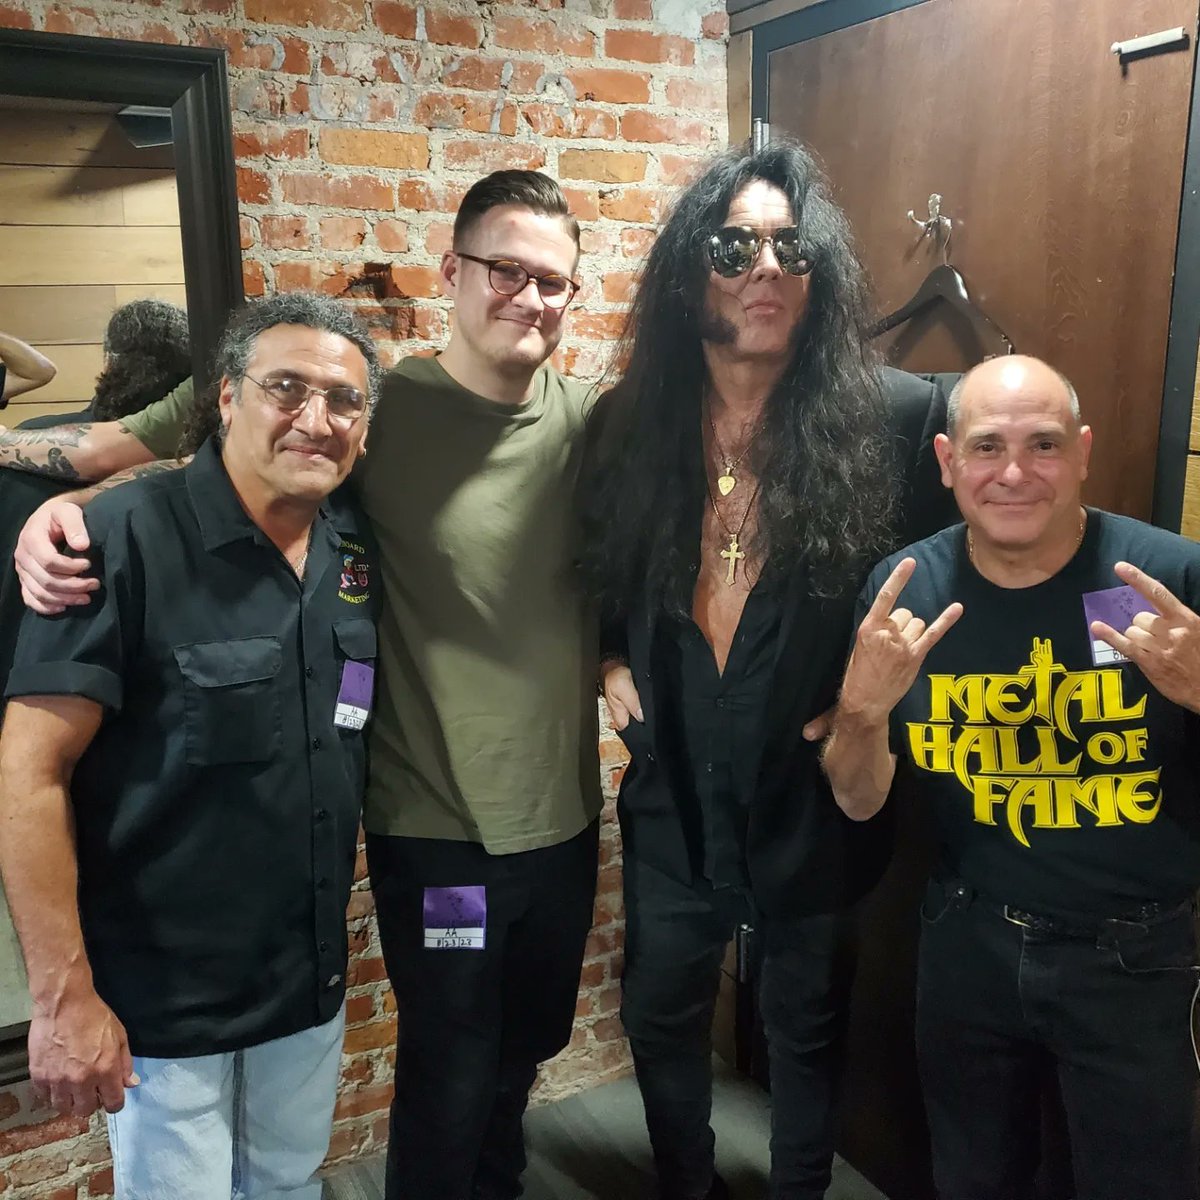 Great to see my old friend @OfficialYJM @TheParamountNY last night with Pat from @metalhall_fame and Patrick from @MLG_Rocks hard to believe he's one of our longest running artists for radio promotion since 1990 when I was a label guy. @PolygramRecords